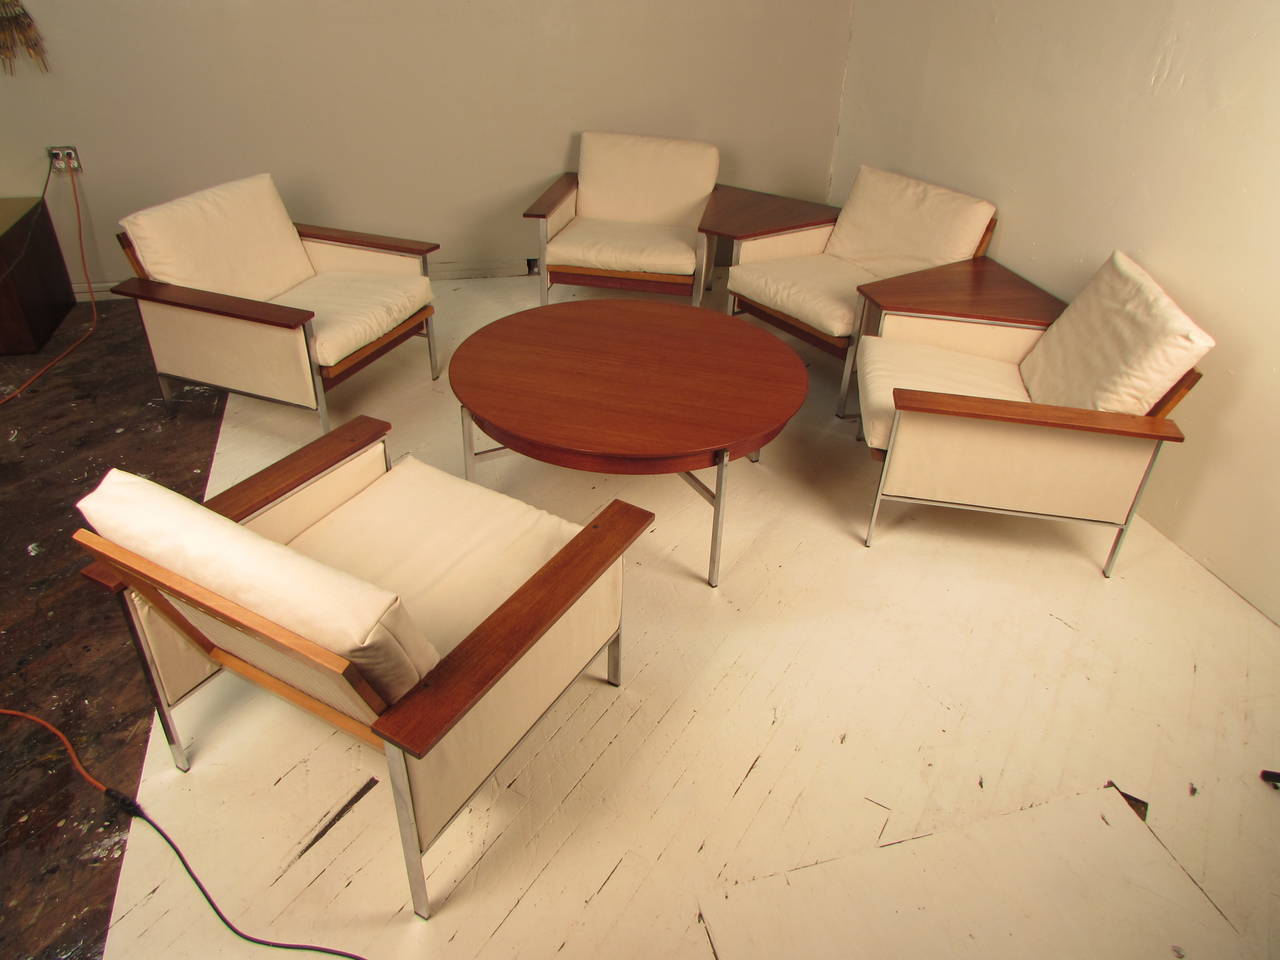 Gorgeous walnut and chrome, 1960s eight-piece living room suite by Mustering, Germany. The suite consists of five lounge chairs, two attached floating side tables, and a round cocktail table.
These pieces were purchased in Denmark and personally